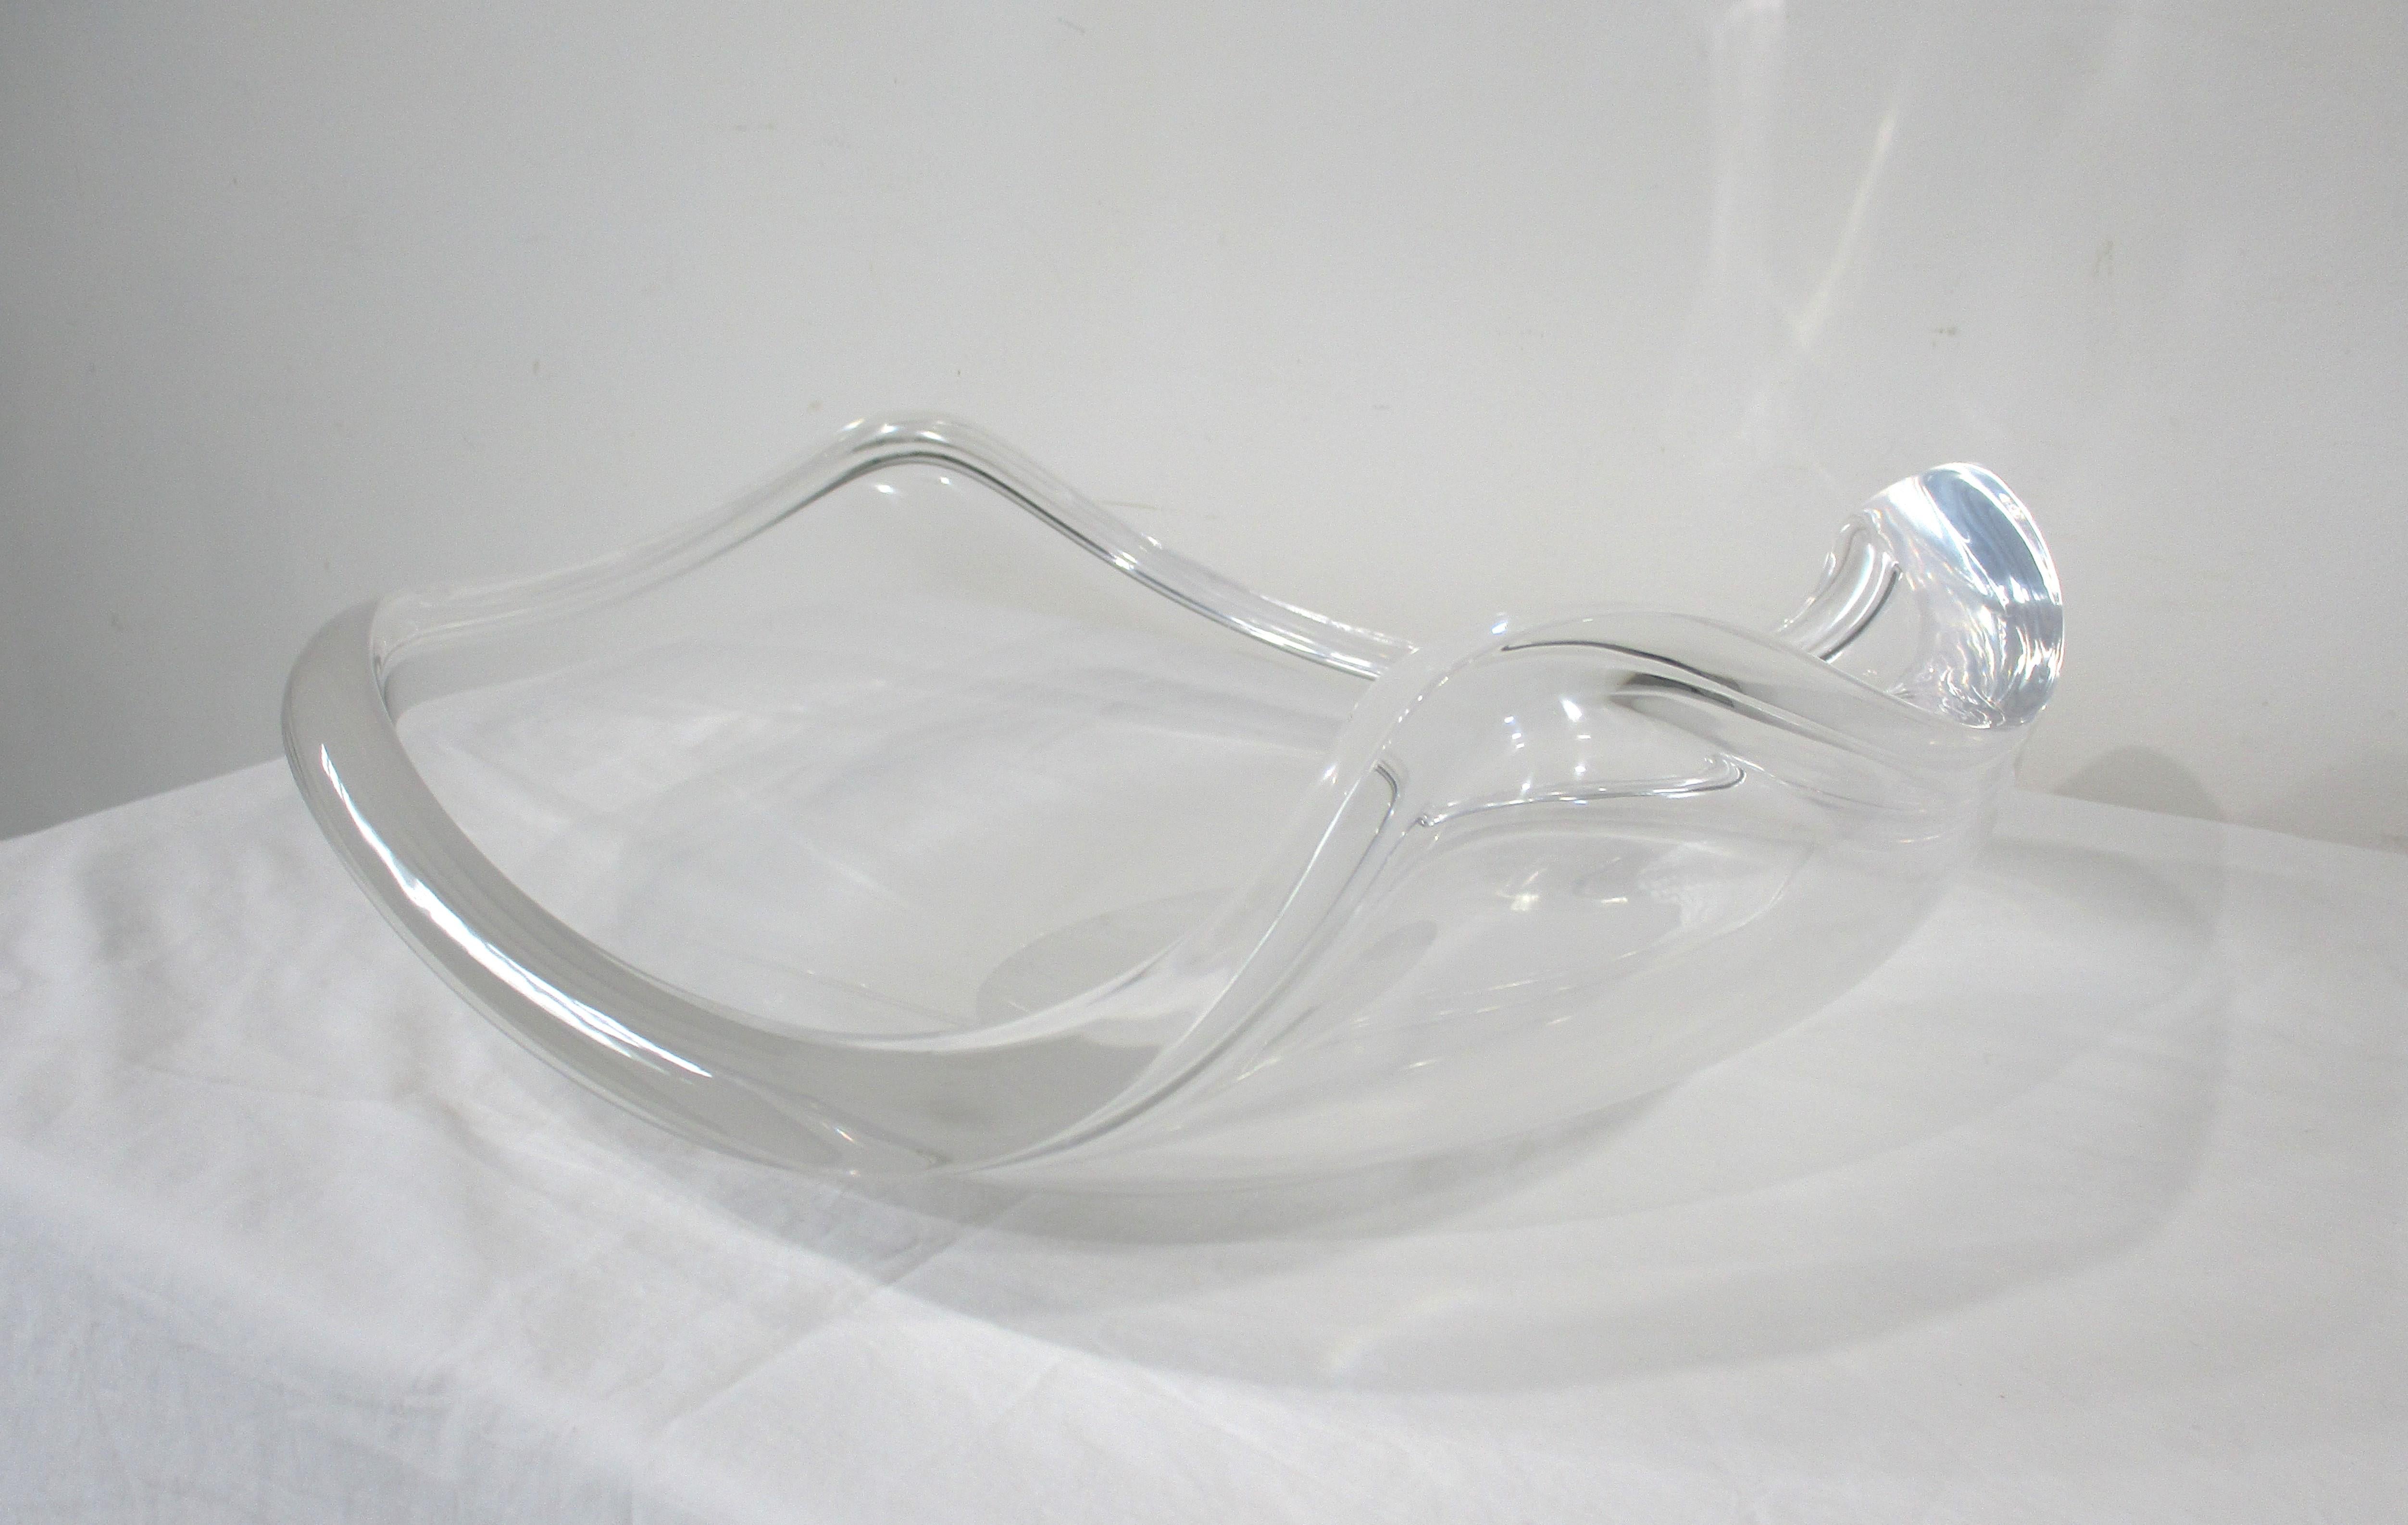 20th Century Herb Ritts Large Mid Century Sculptural Lucite Center Piece Bowl for Astrolite For Sale